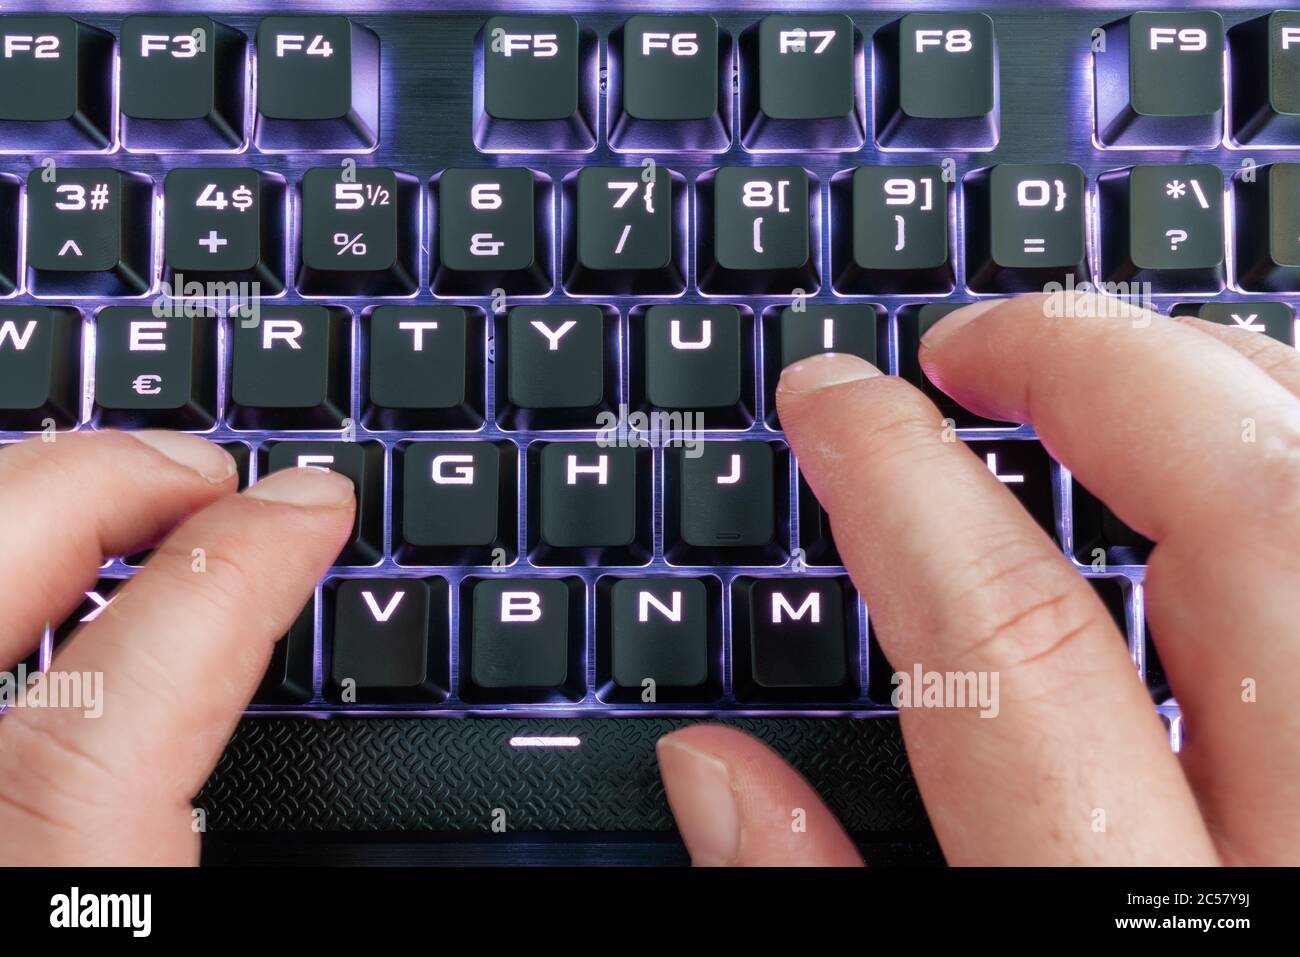 Closeup view of a keyboard with bright led lights for easy and comfortable using pc or notebook. High Tech concept Stock Photo